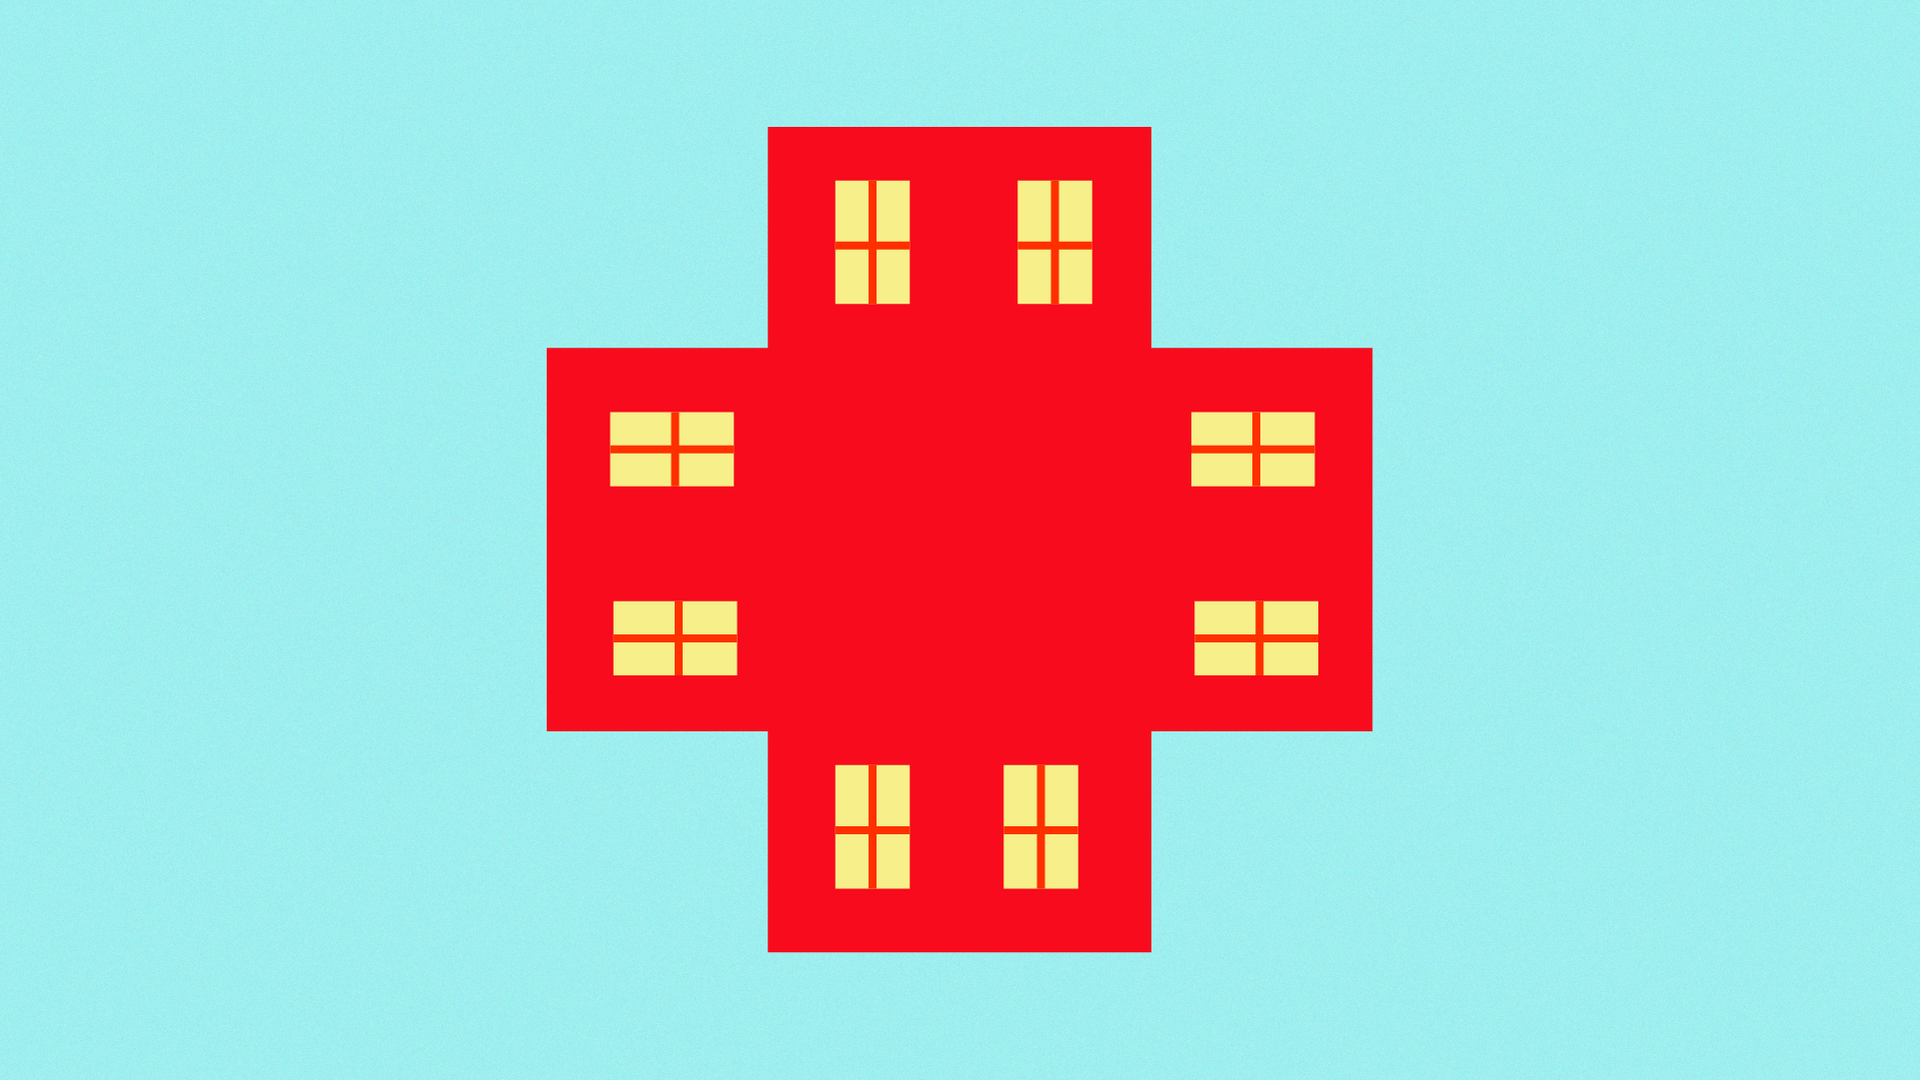  Illustration of a red cross made out of apartment buildings with windows.